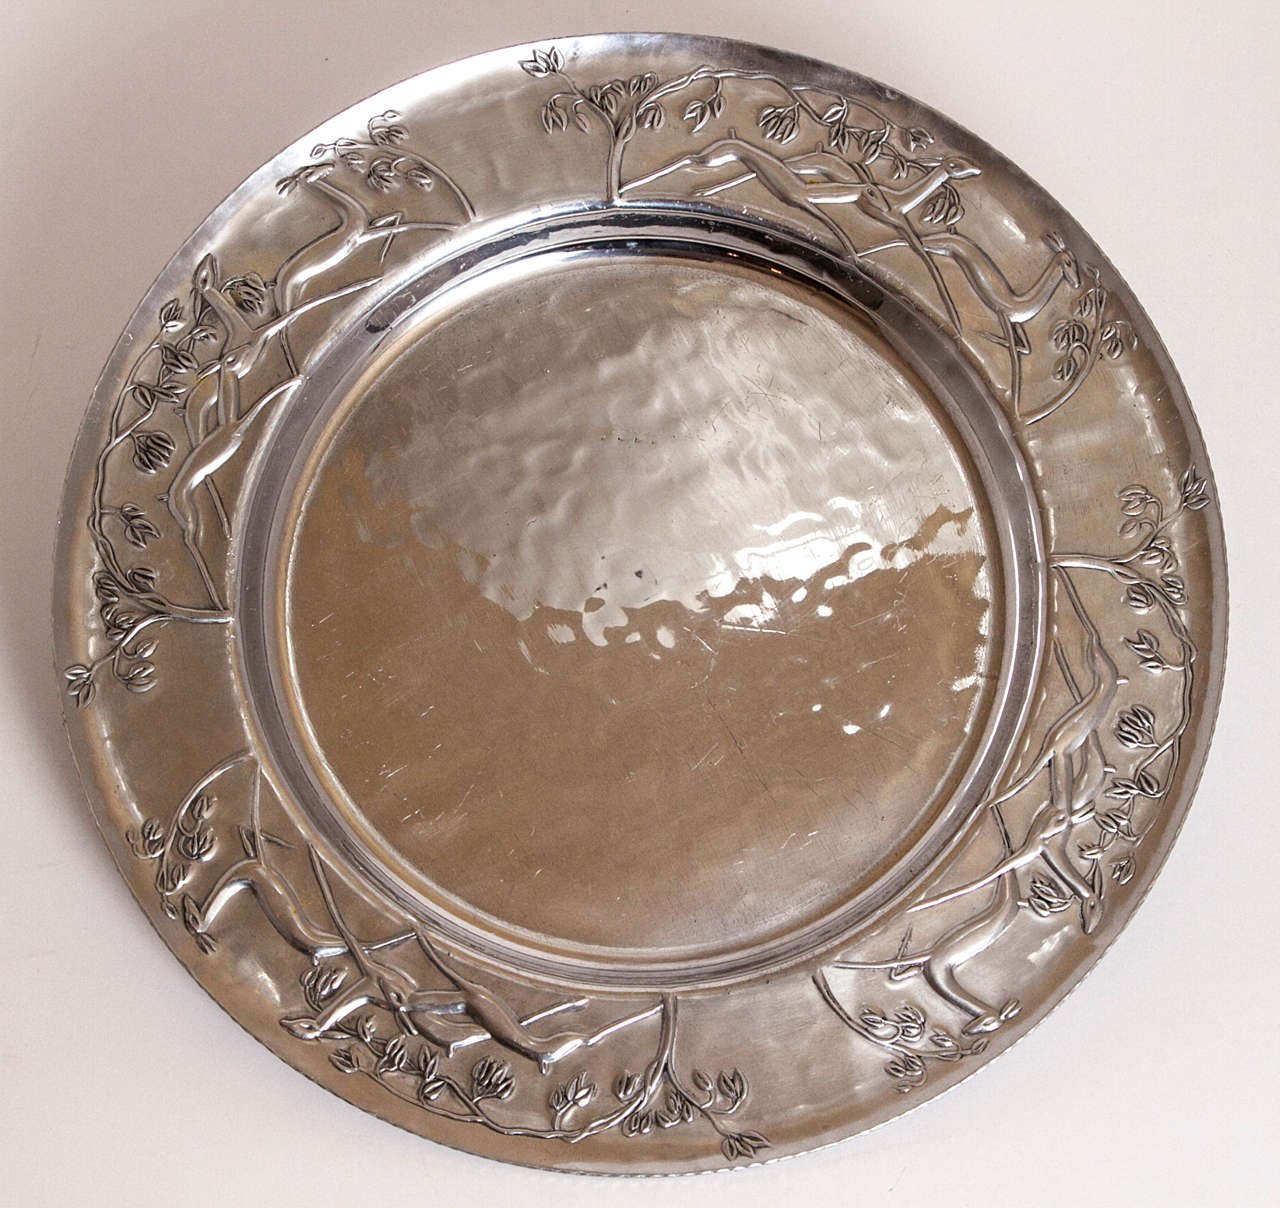 Very nice example of 1930s-1940s hand-forged American aluminum ware.
Stylized gazelles and trees.
Very nice workmanship.
Original glass condiment insert.
Signed.